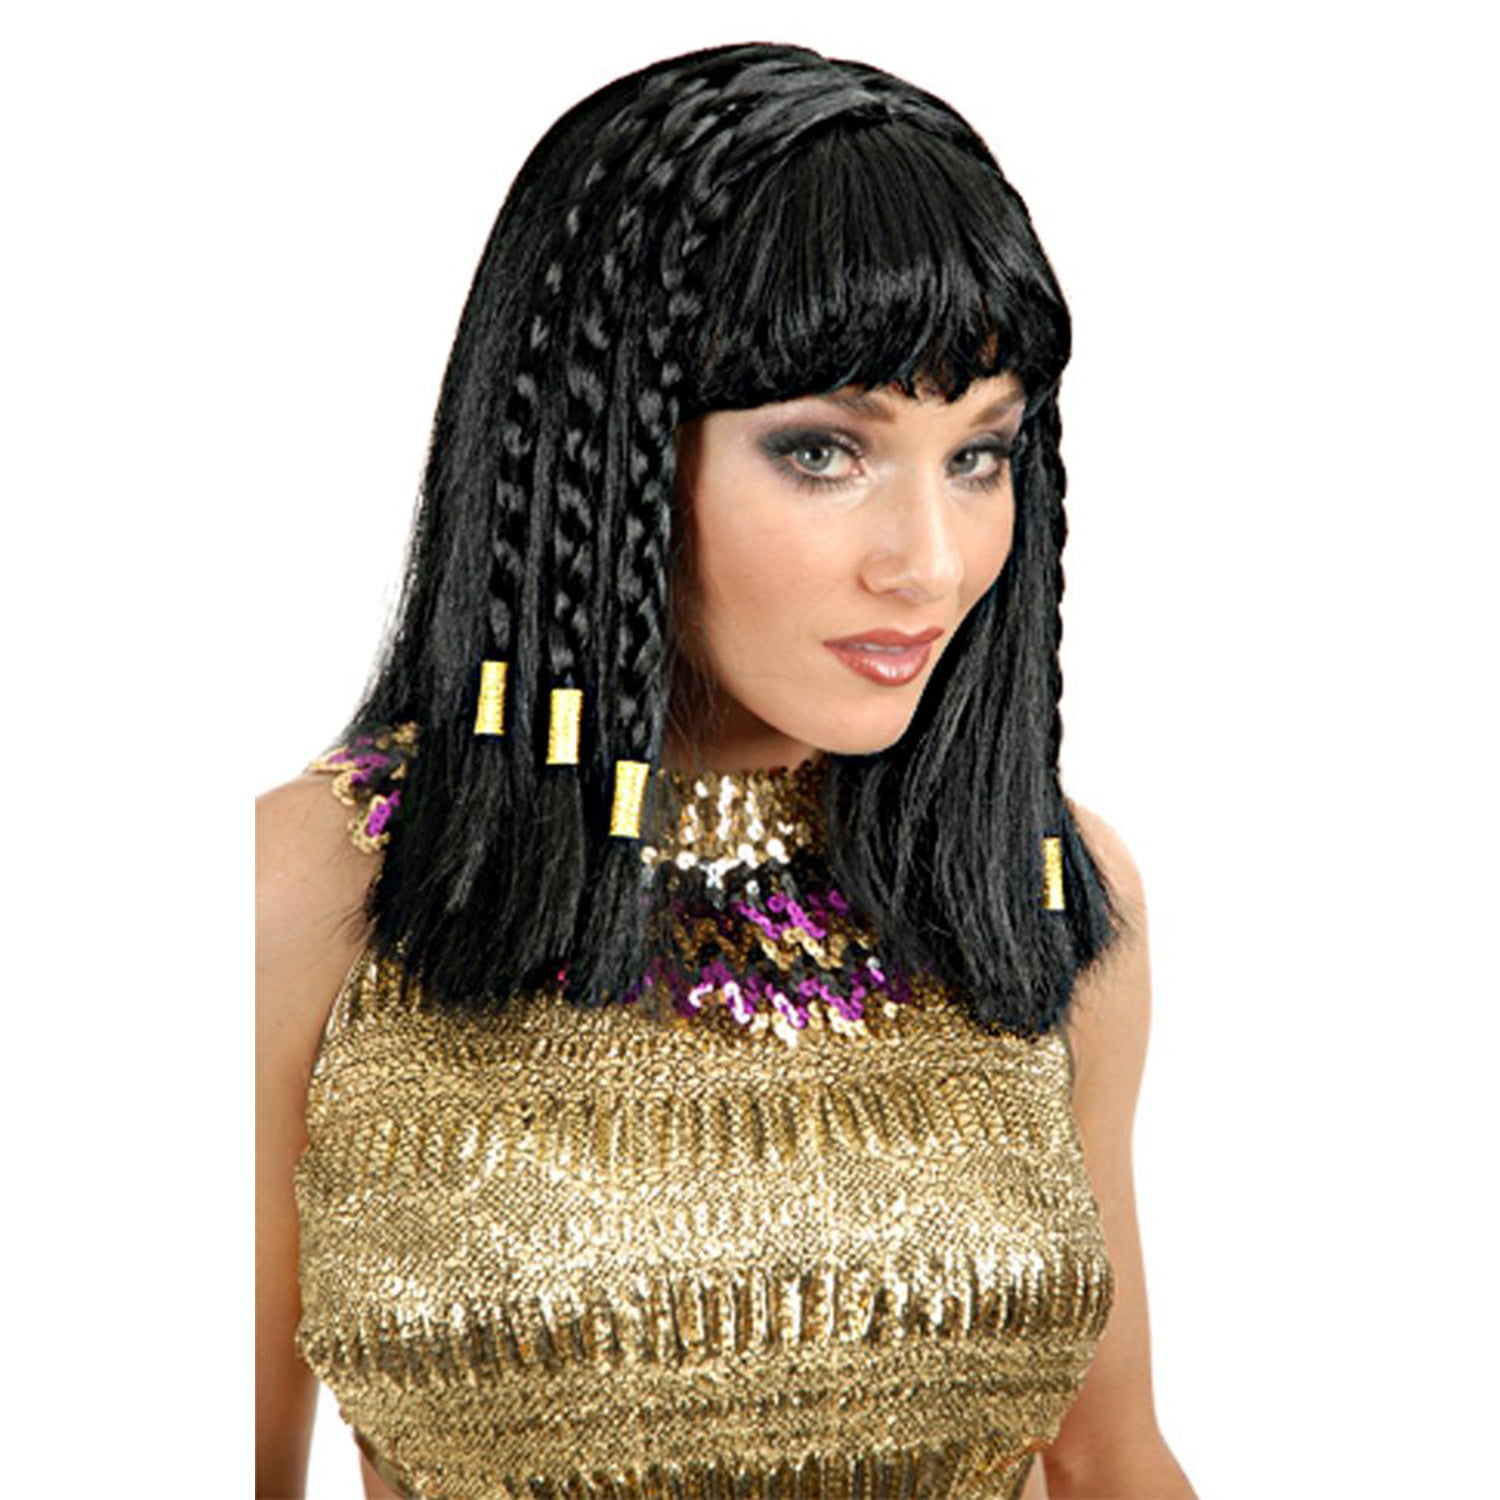 Cleopatra Wig Deluxe Egyptian Queen Fancy Dress Costume Accessory Wig with Beads 